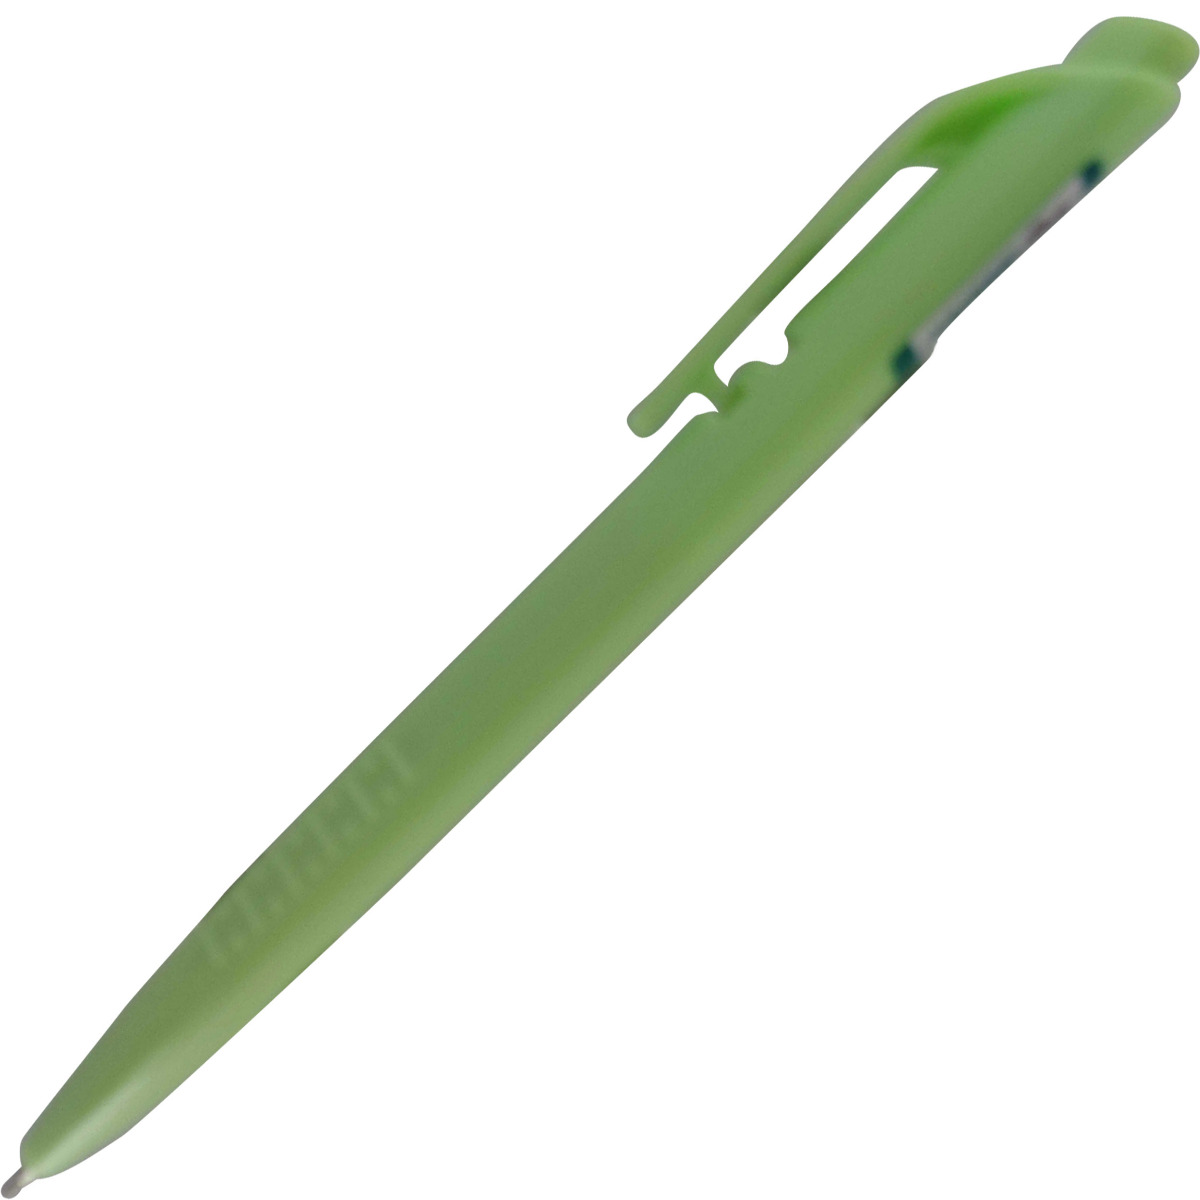 Hauser Billi Model: 13623 Pale green color body with Blue ink fine Tip Rectractable ball pen